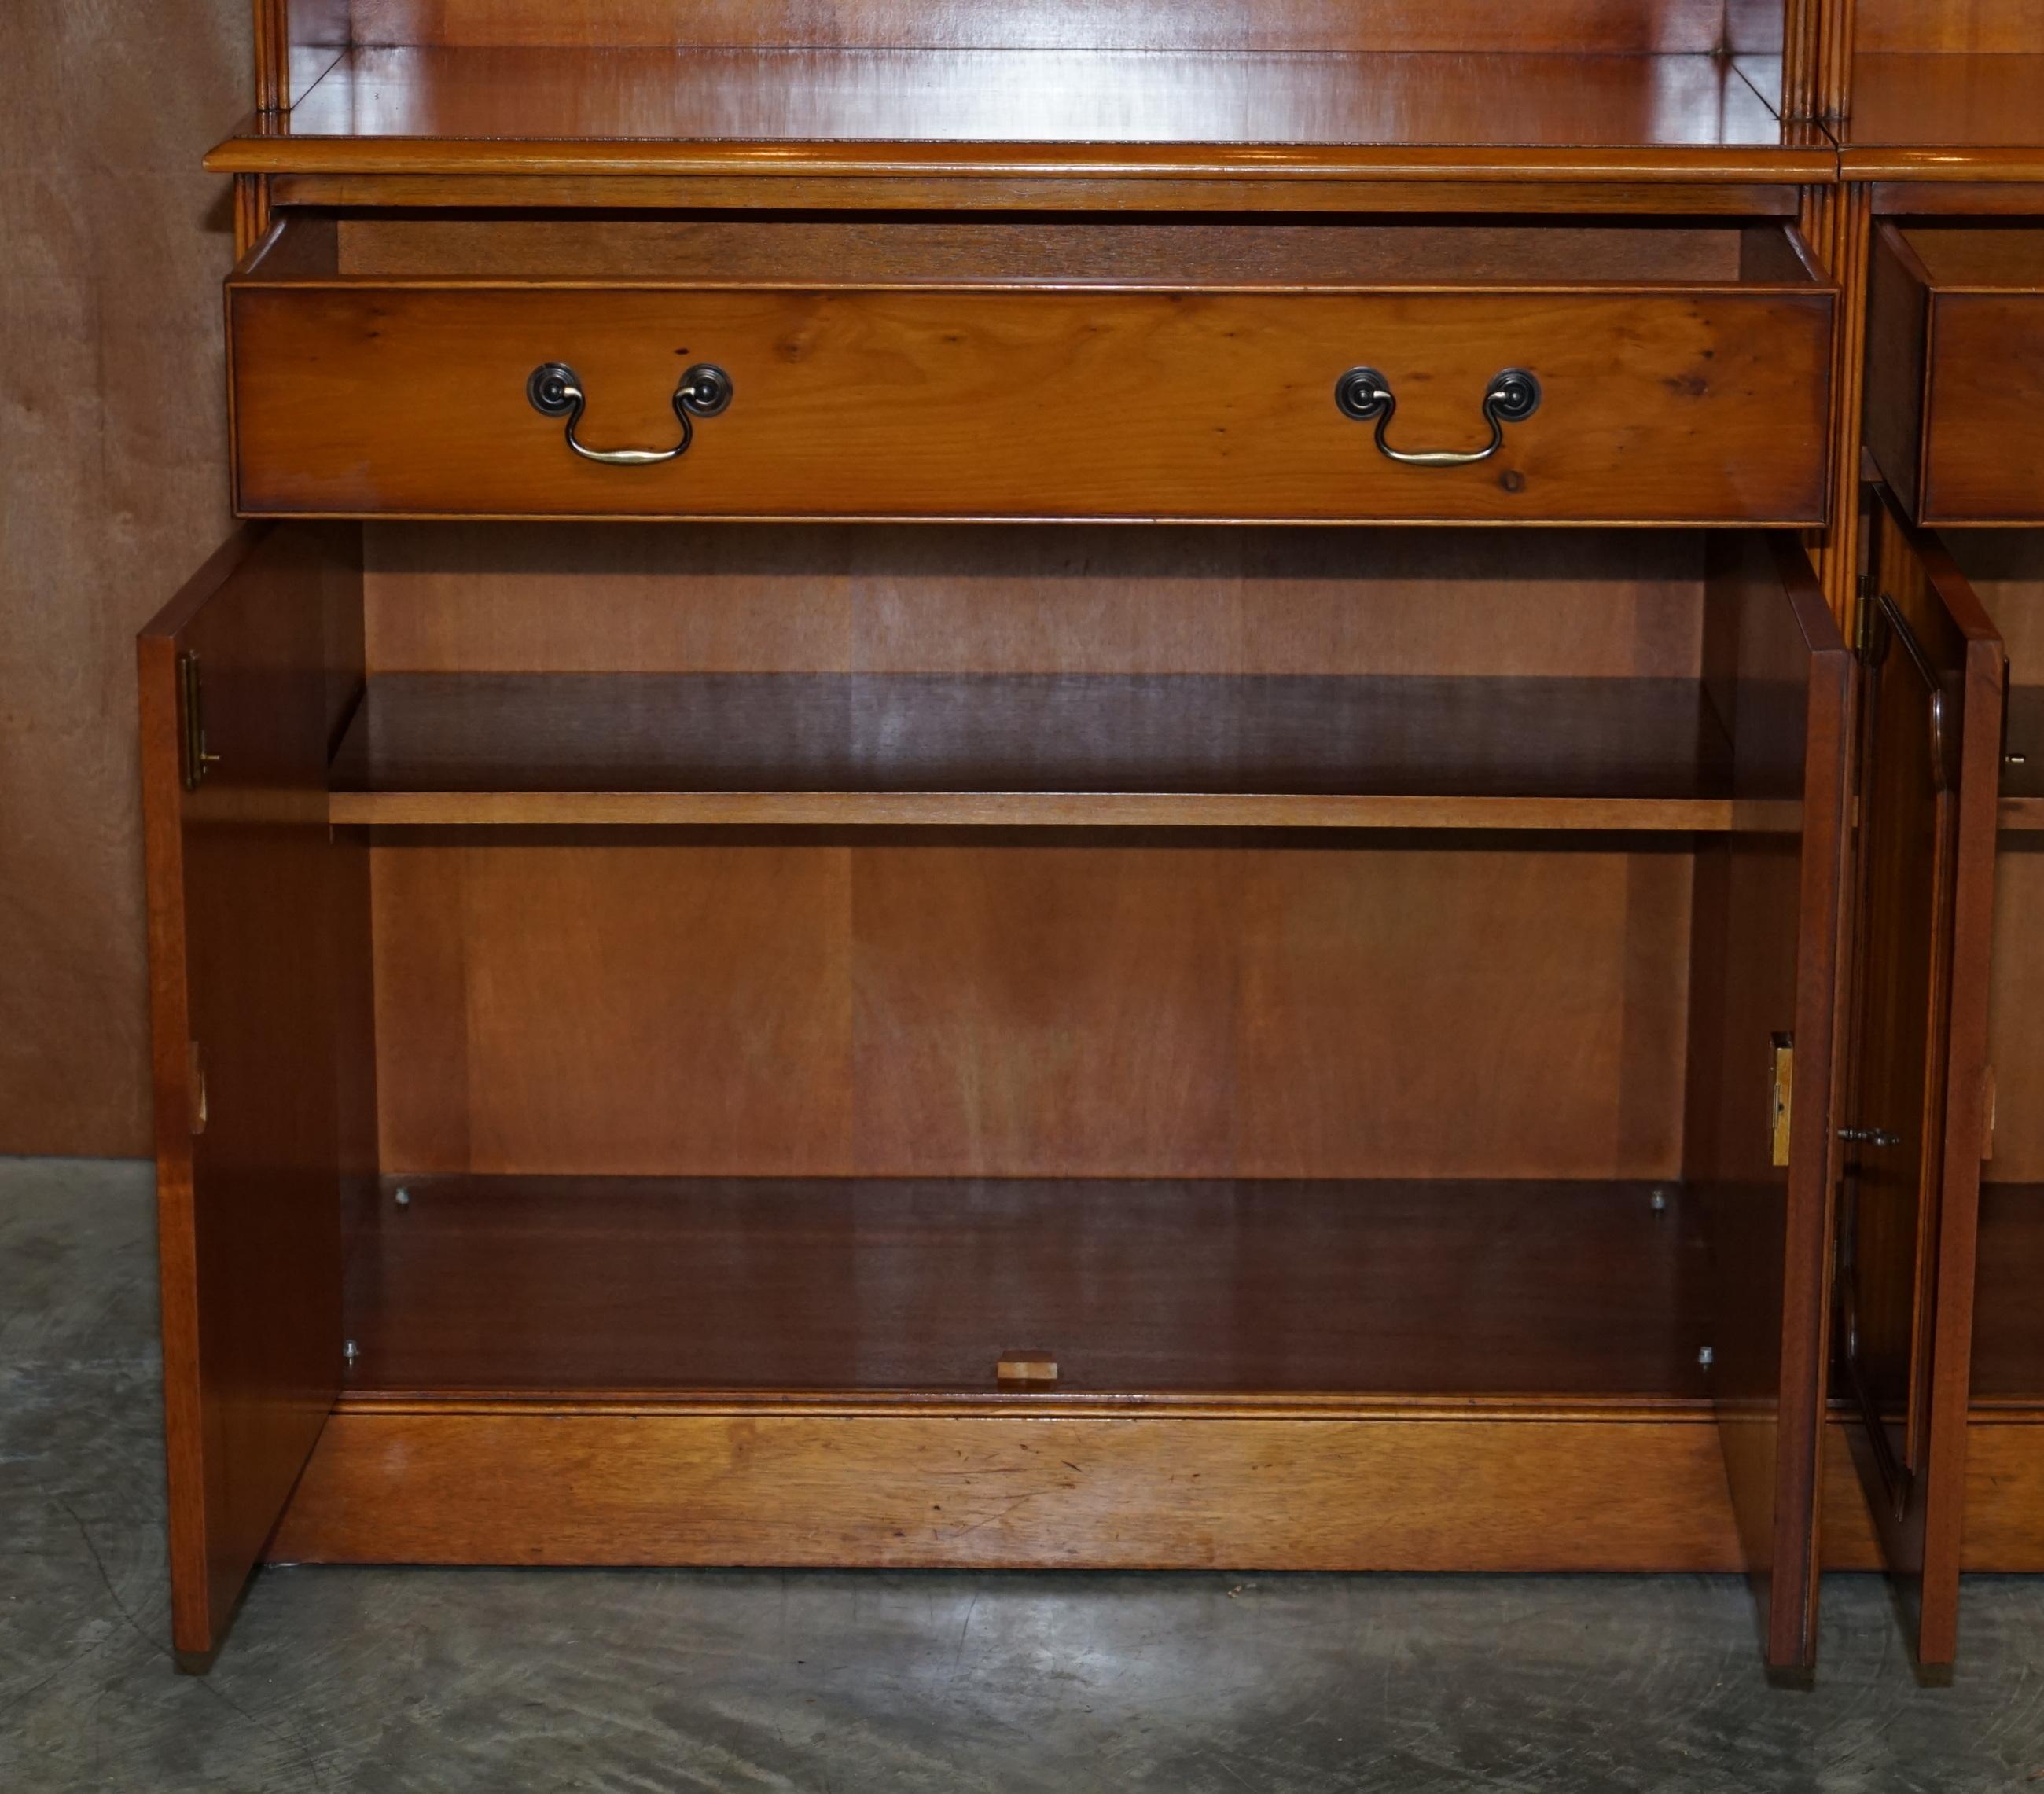 Triple Bank Bradley Furniture Burr Yew Wood Library Display Bookcase with Lights 5